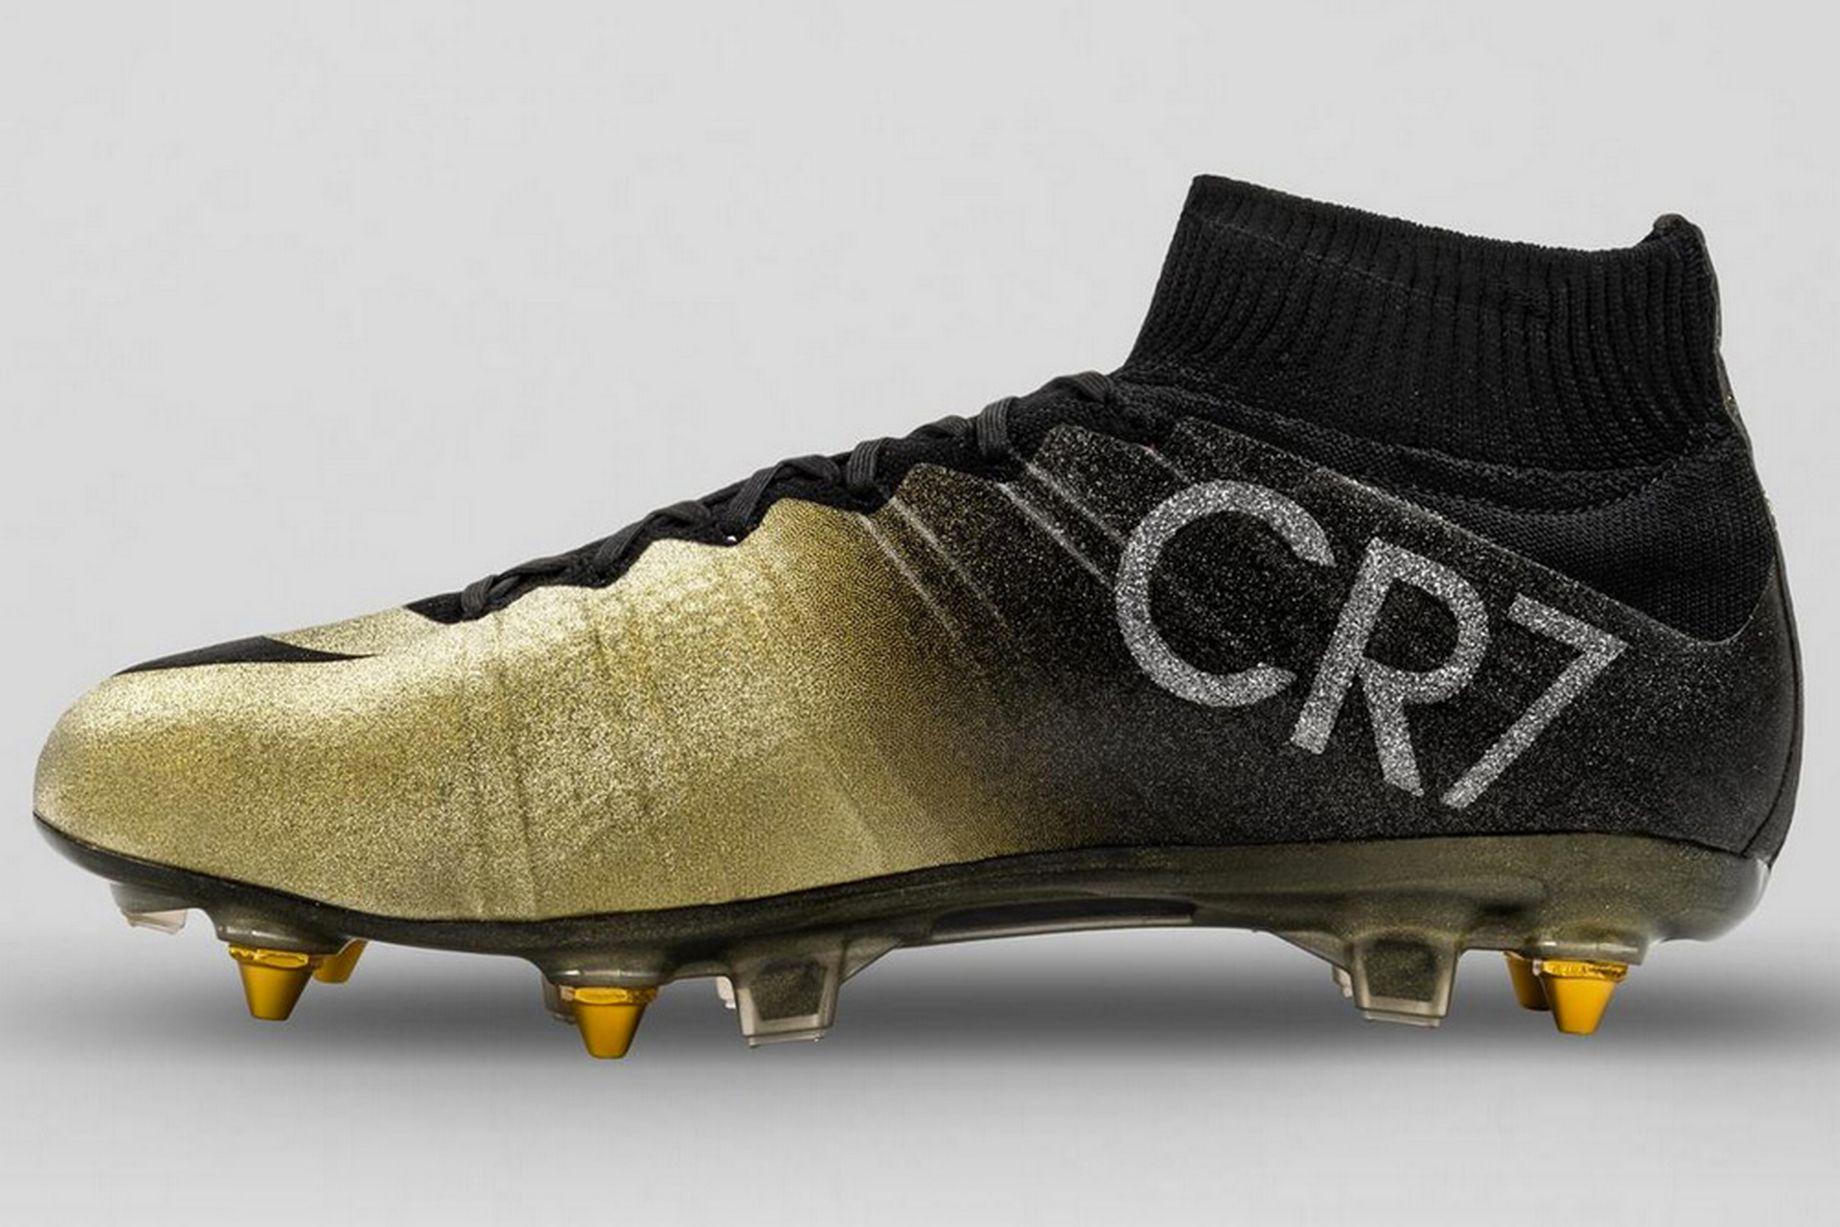 In picture: Cristiano Ronaldo's new Nike Mercurial CR7 gold boots